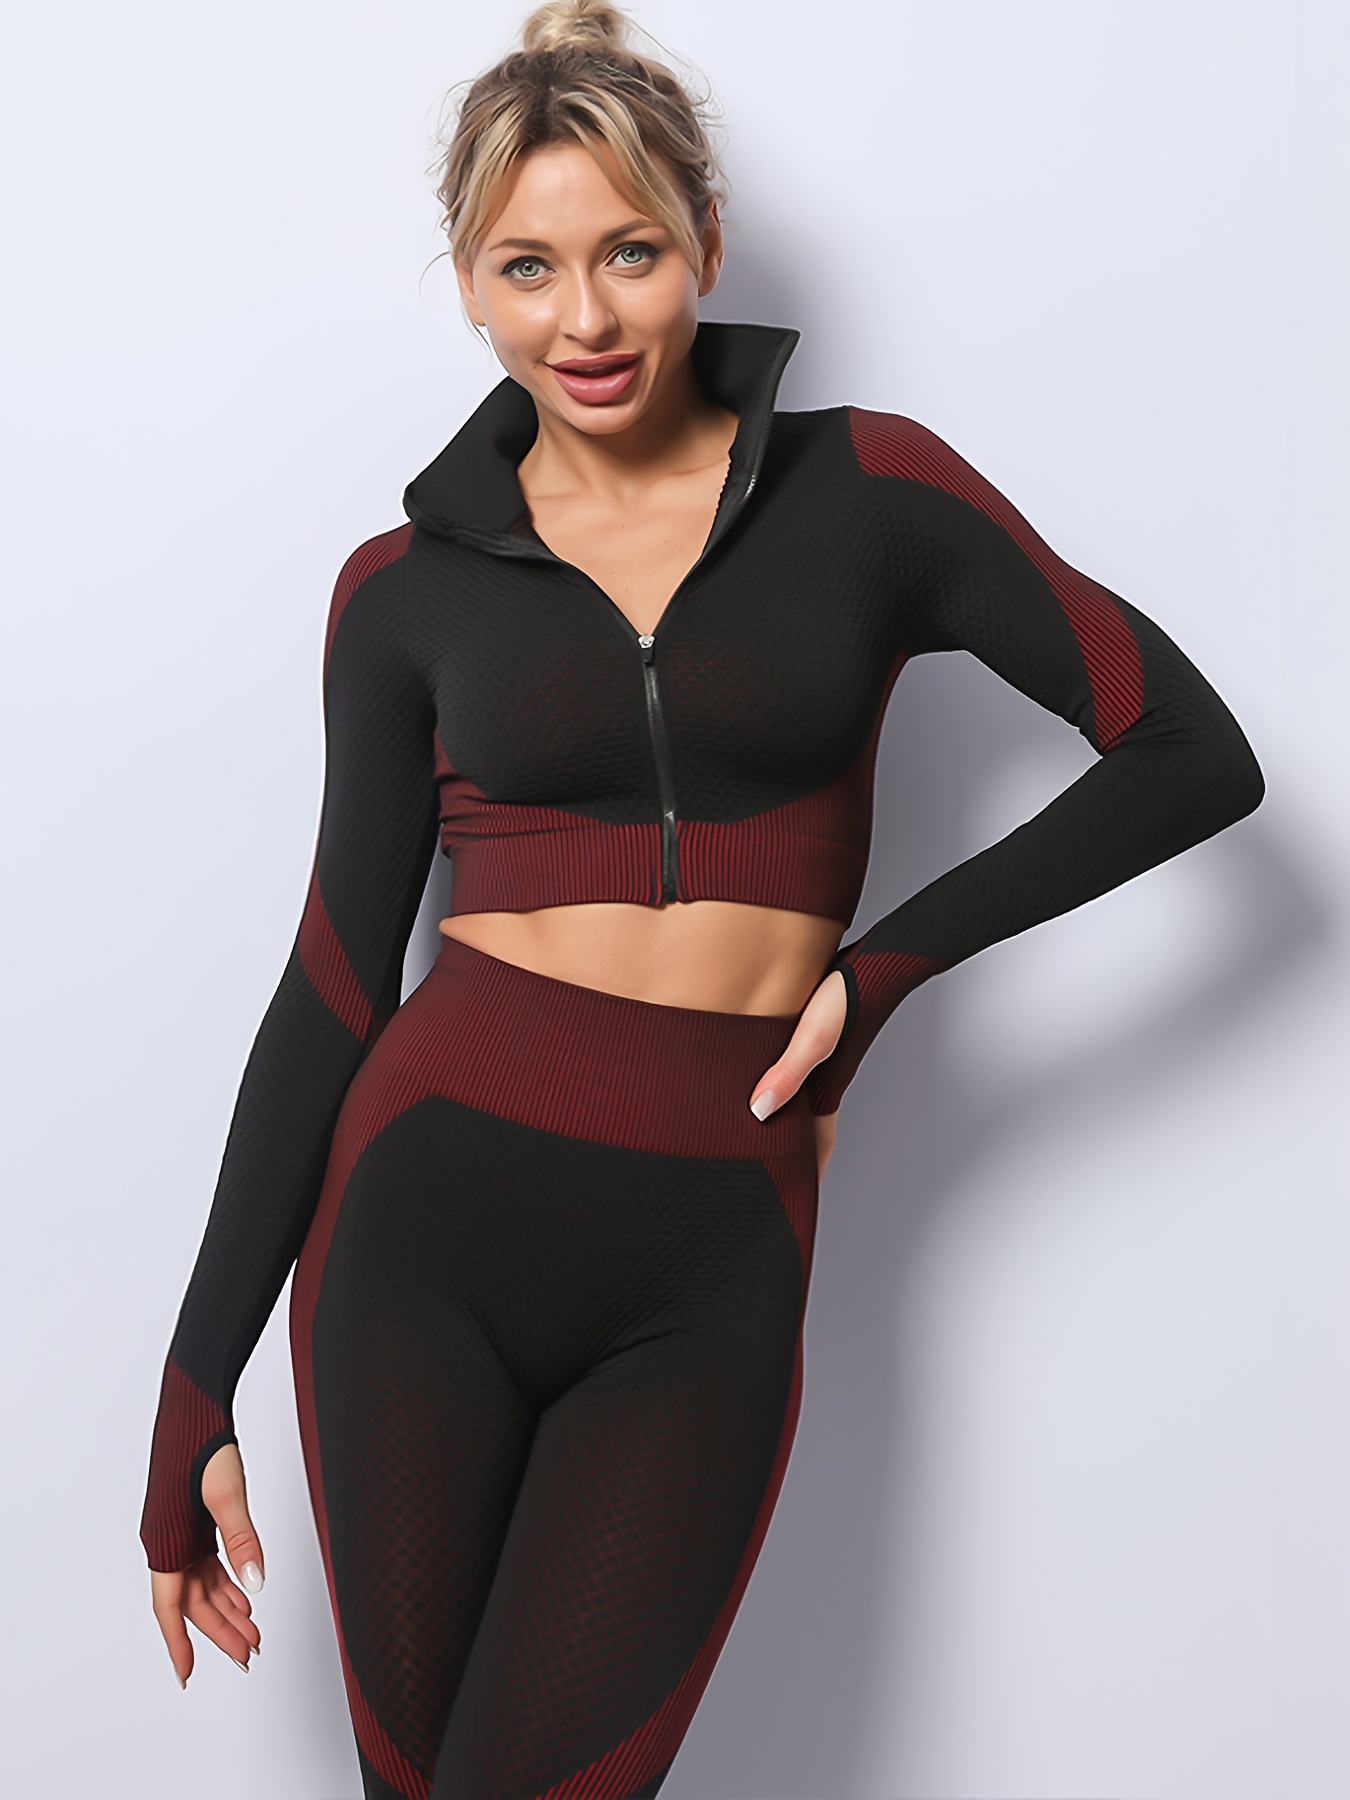 TLF Tempo Ribbed Workout Sports Bra + Leggings Set in Deep Ruby Red Size M  - $35 (53% Off Retail) New With Tags - From Mikayla